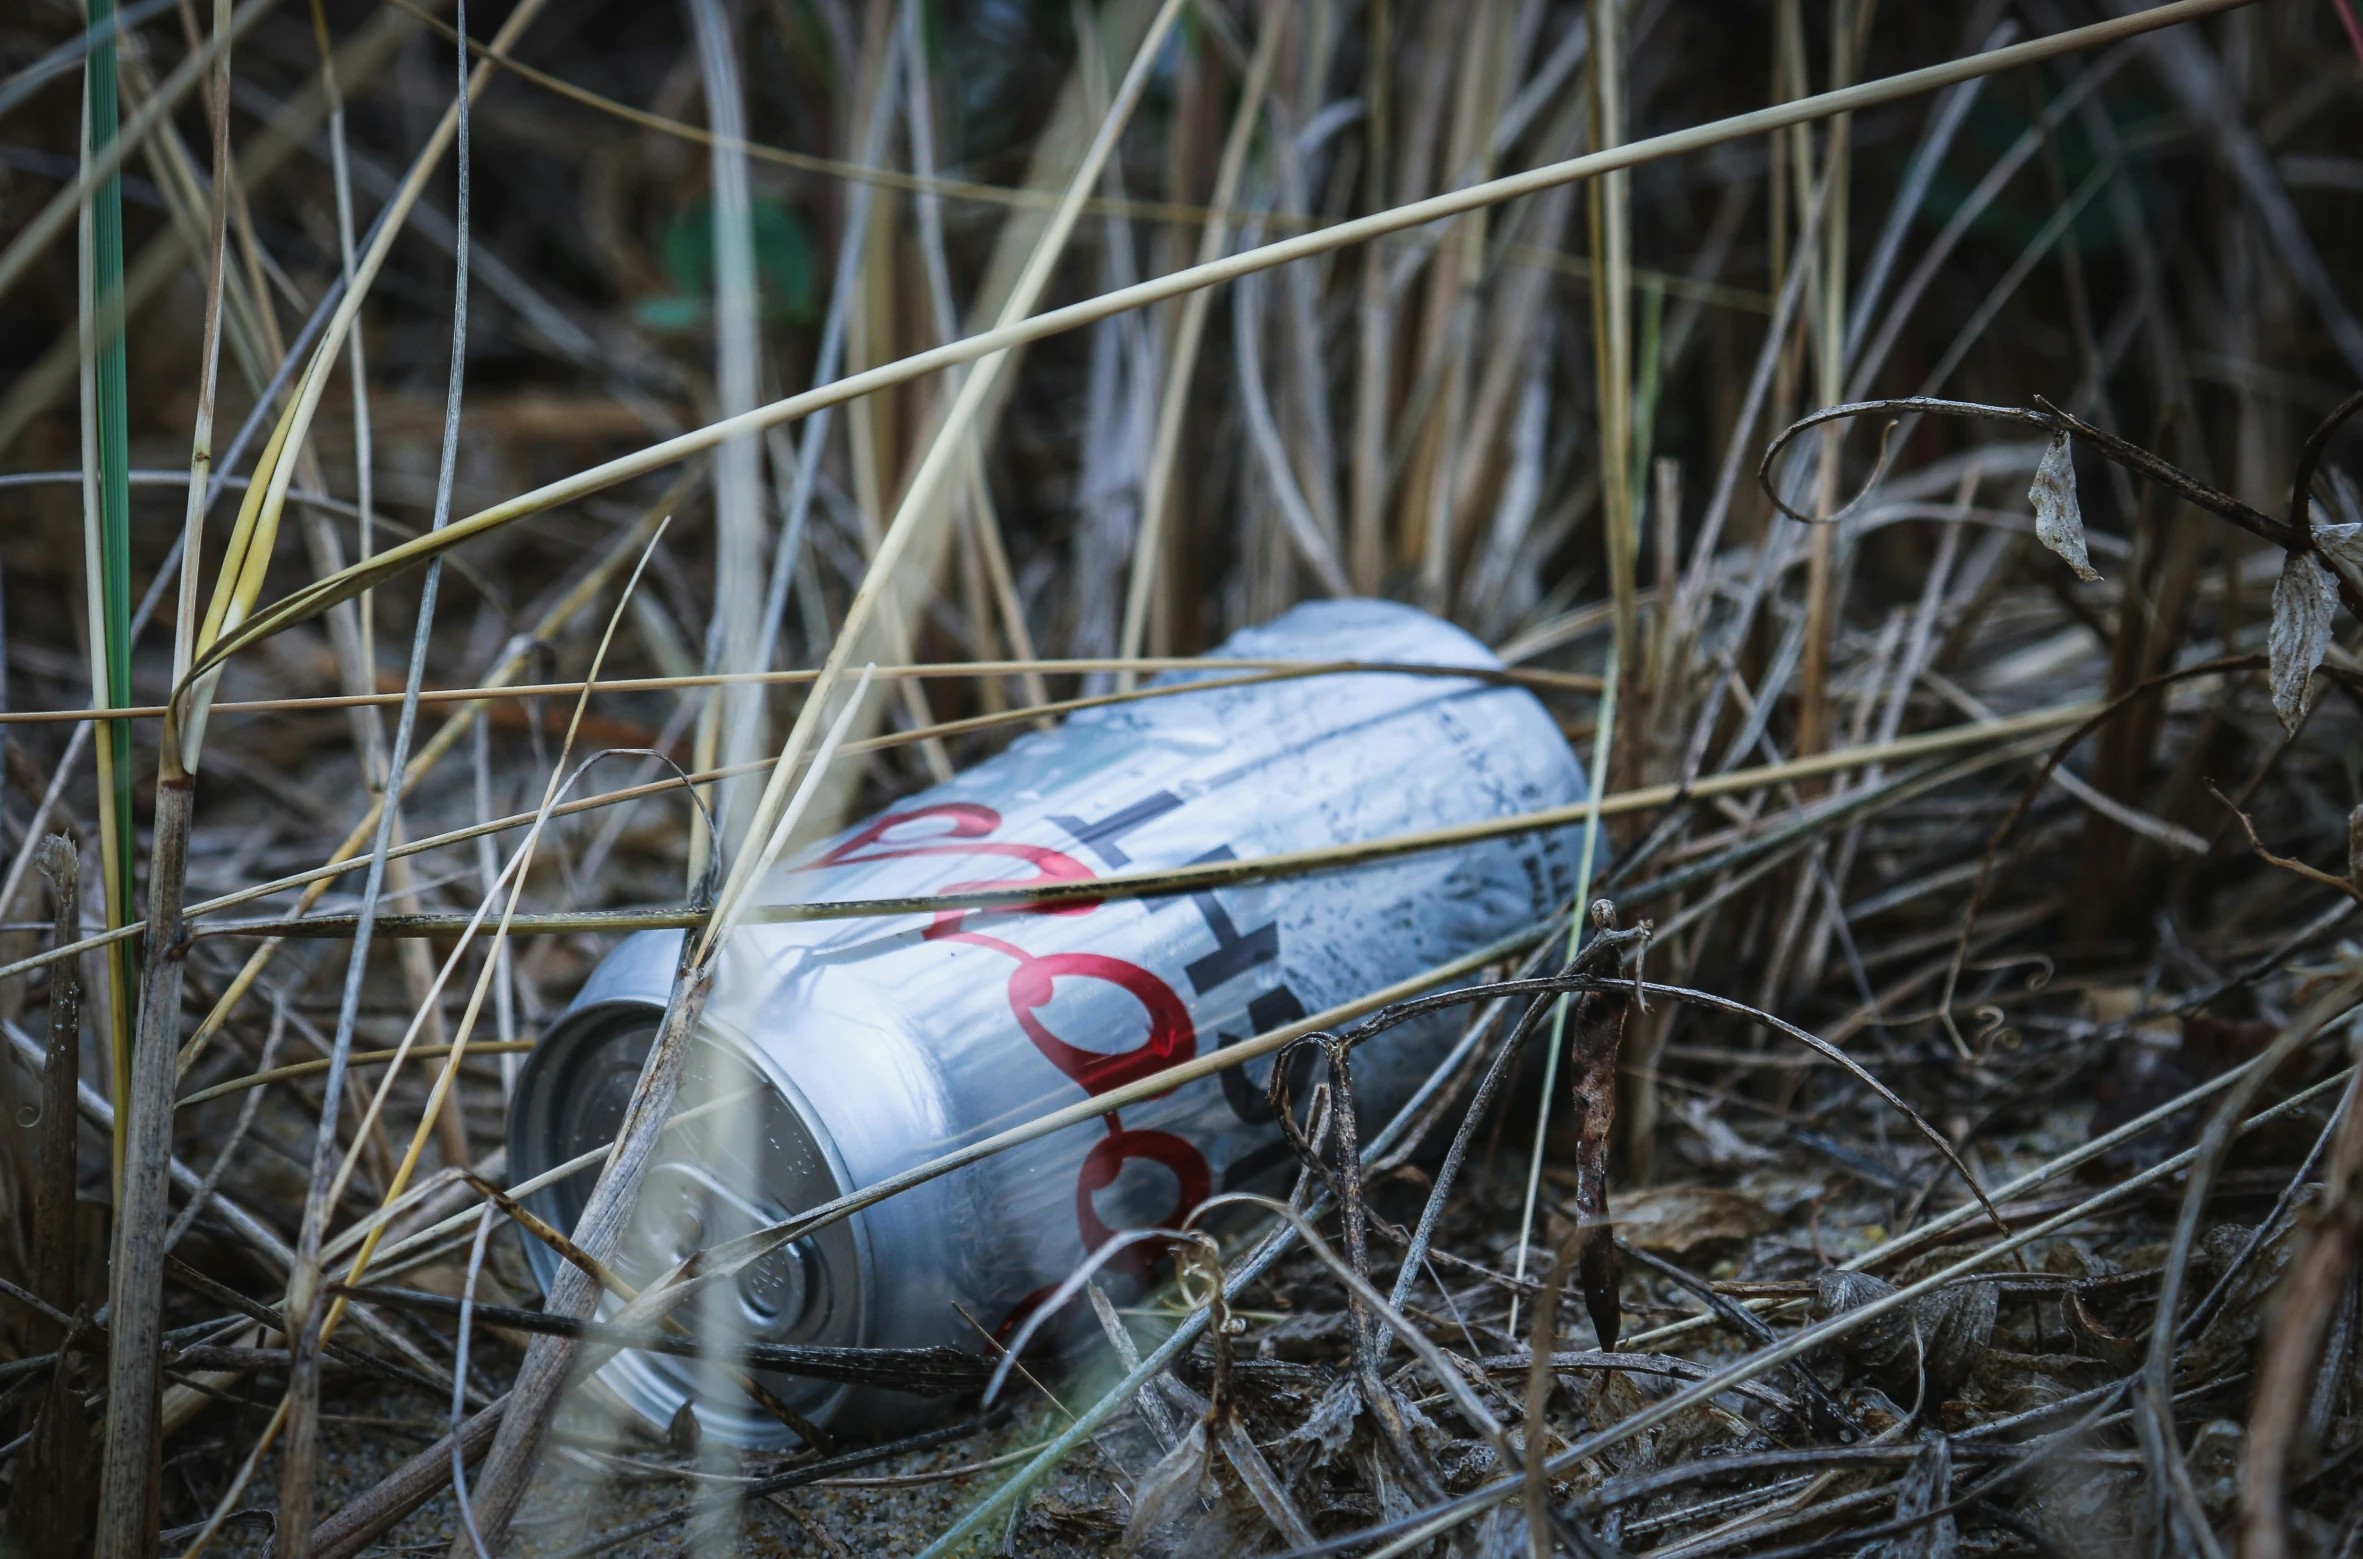 a discarded soda can lays in the grass